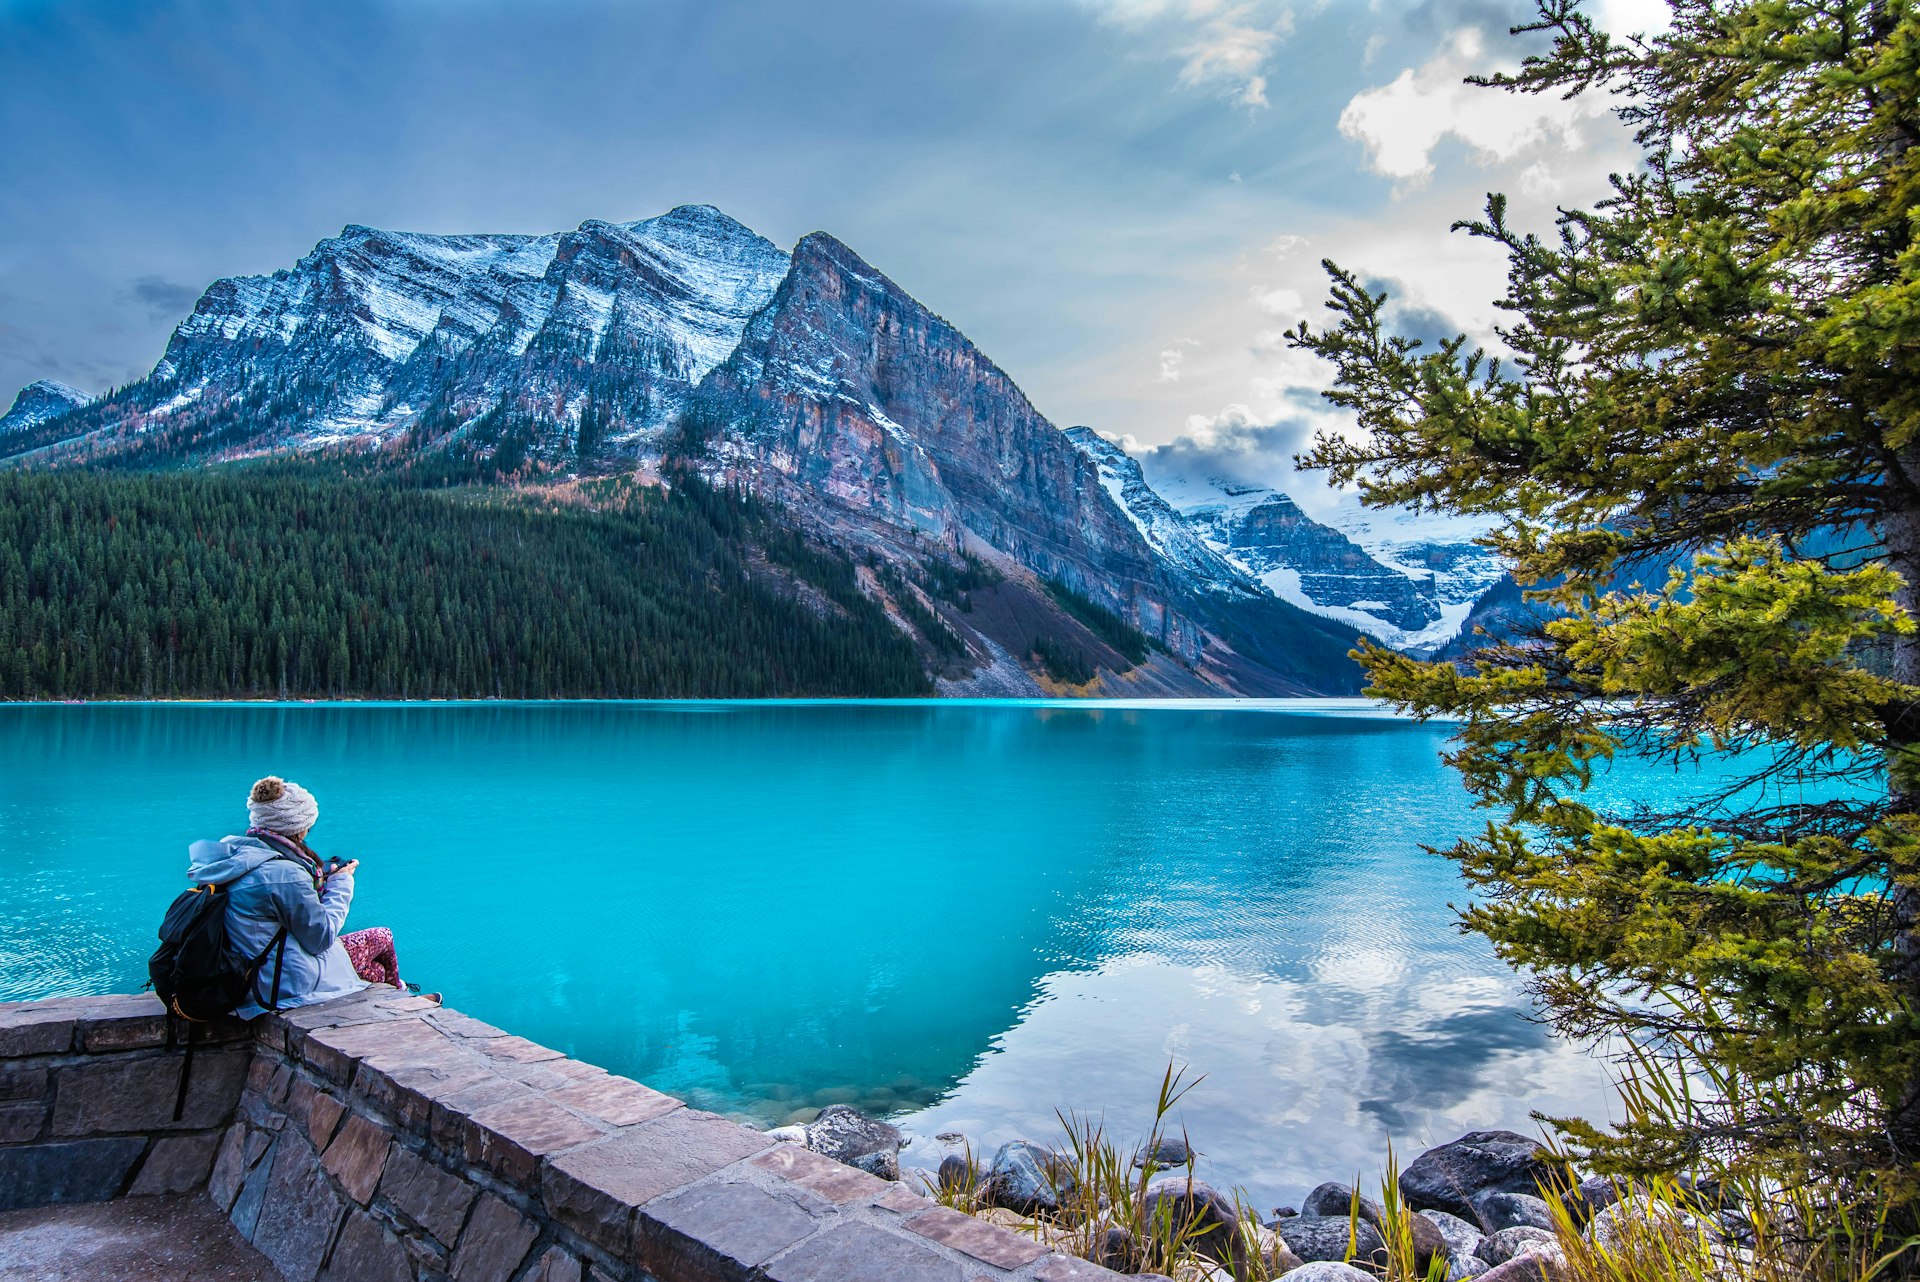 A woman sits on a wall looking out over a stunning turquoise lake surrounded by mountains